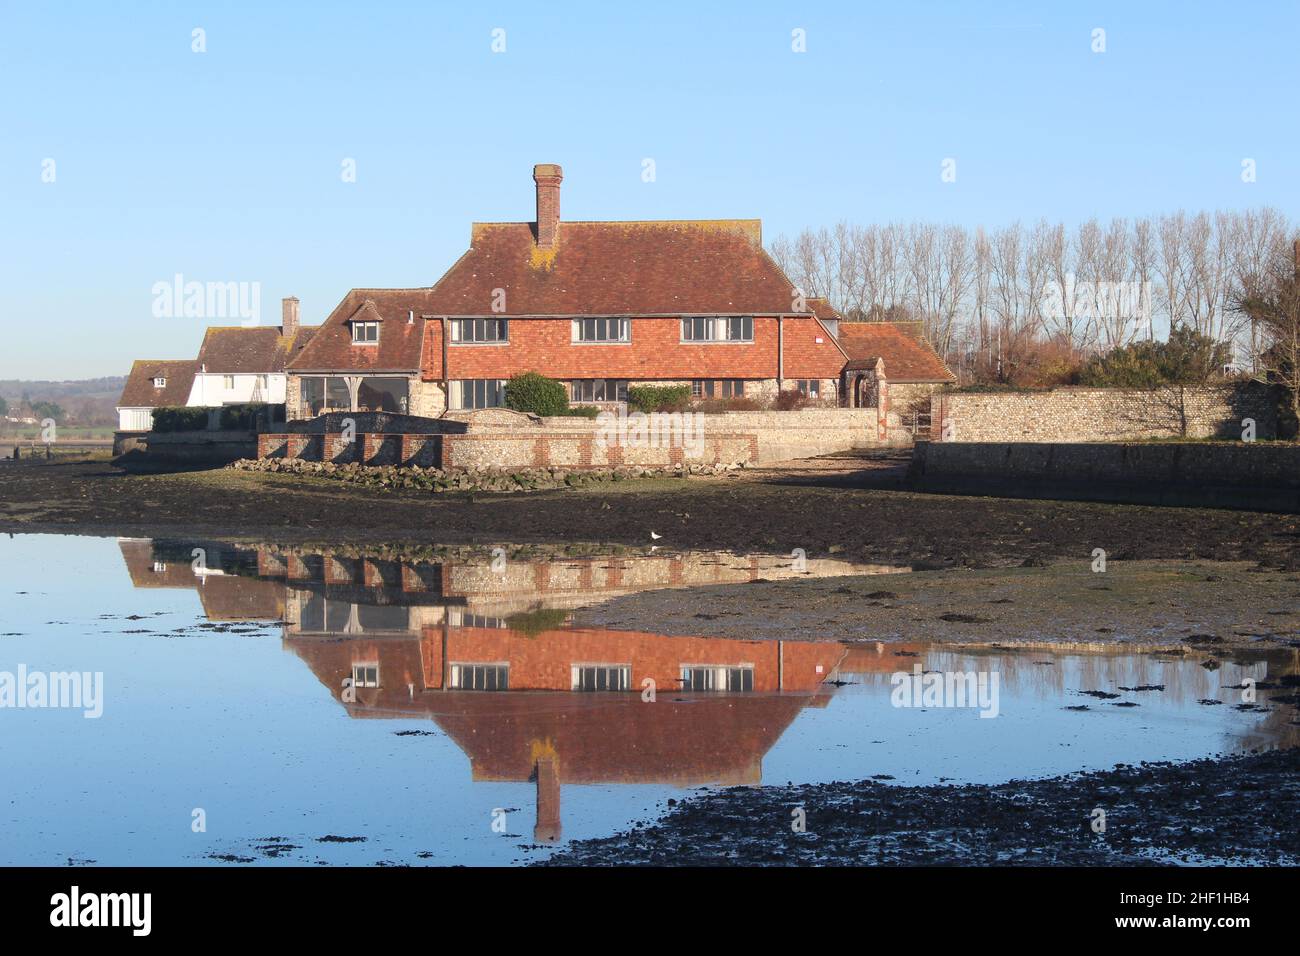 Reflection of harbour-side residential property in Area of Outstanding Natural Beauty, Bosham, West Sussex. A clear blue sky on a winters day. Stock Photo